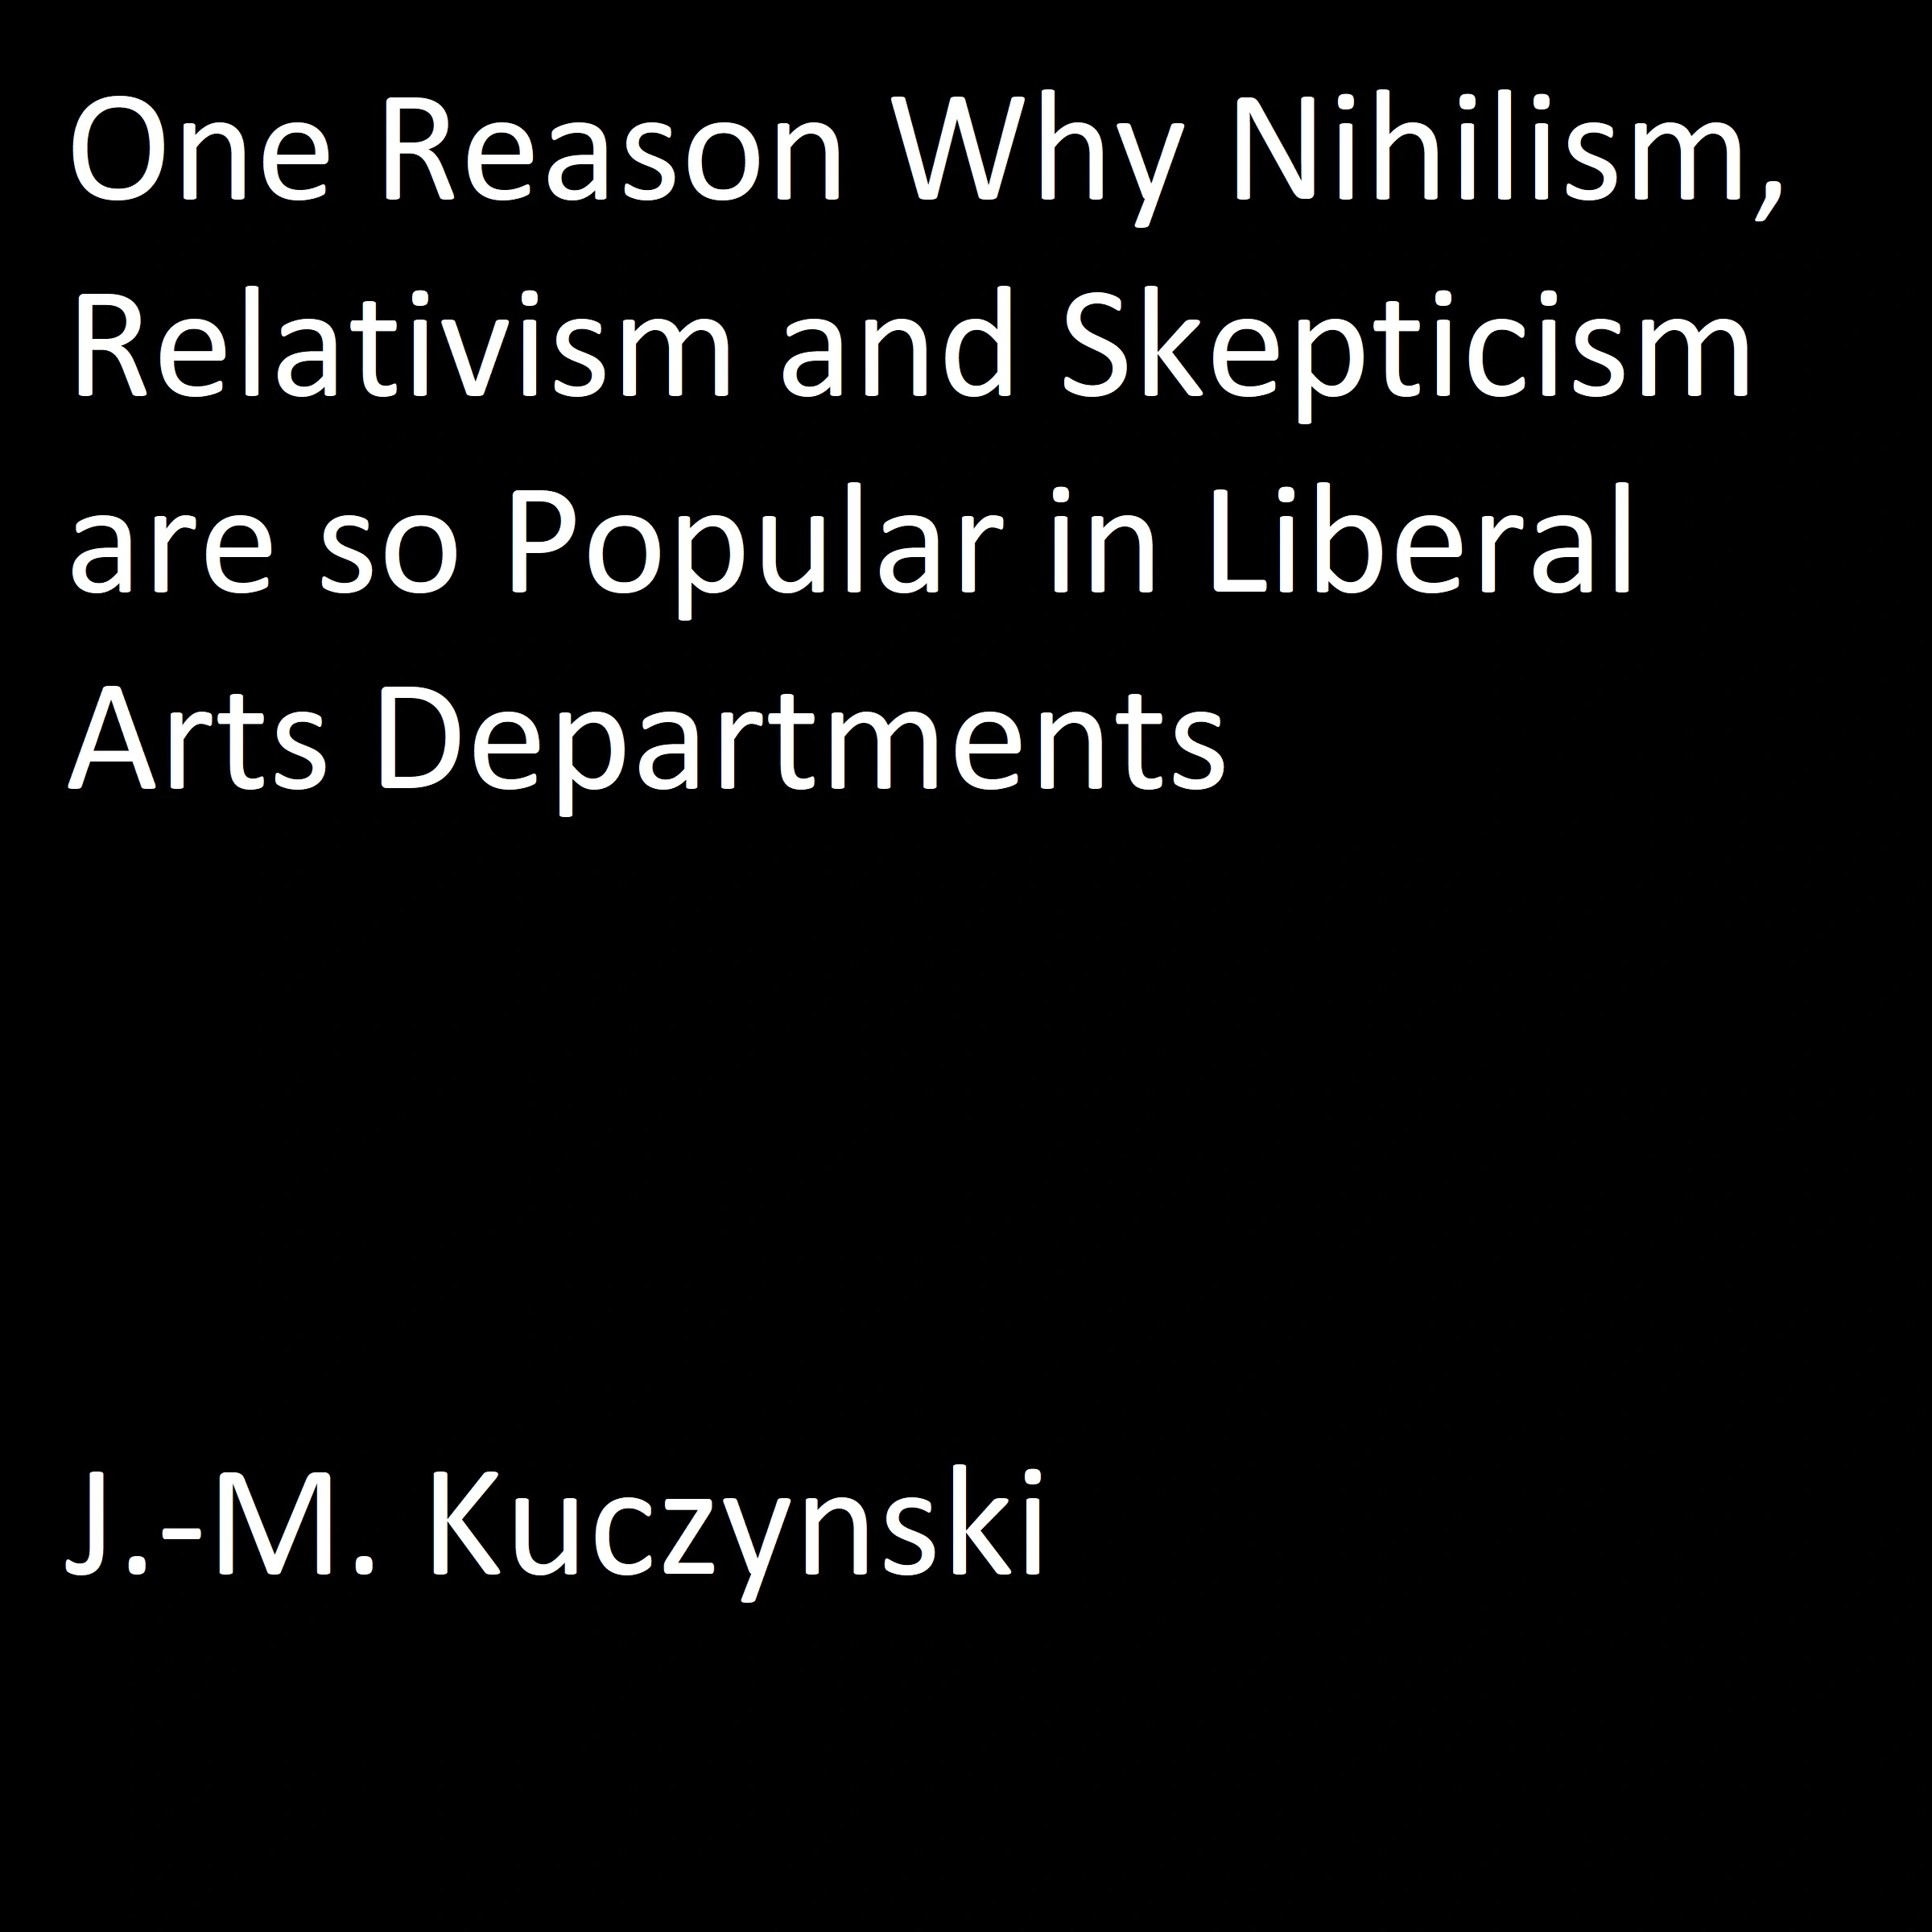 One Reason Why Nihilism, Relativism, and Skepticism are so Popular in Liberal Arts Departments Audiobook by J.-M. Kuczynski